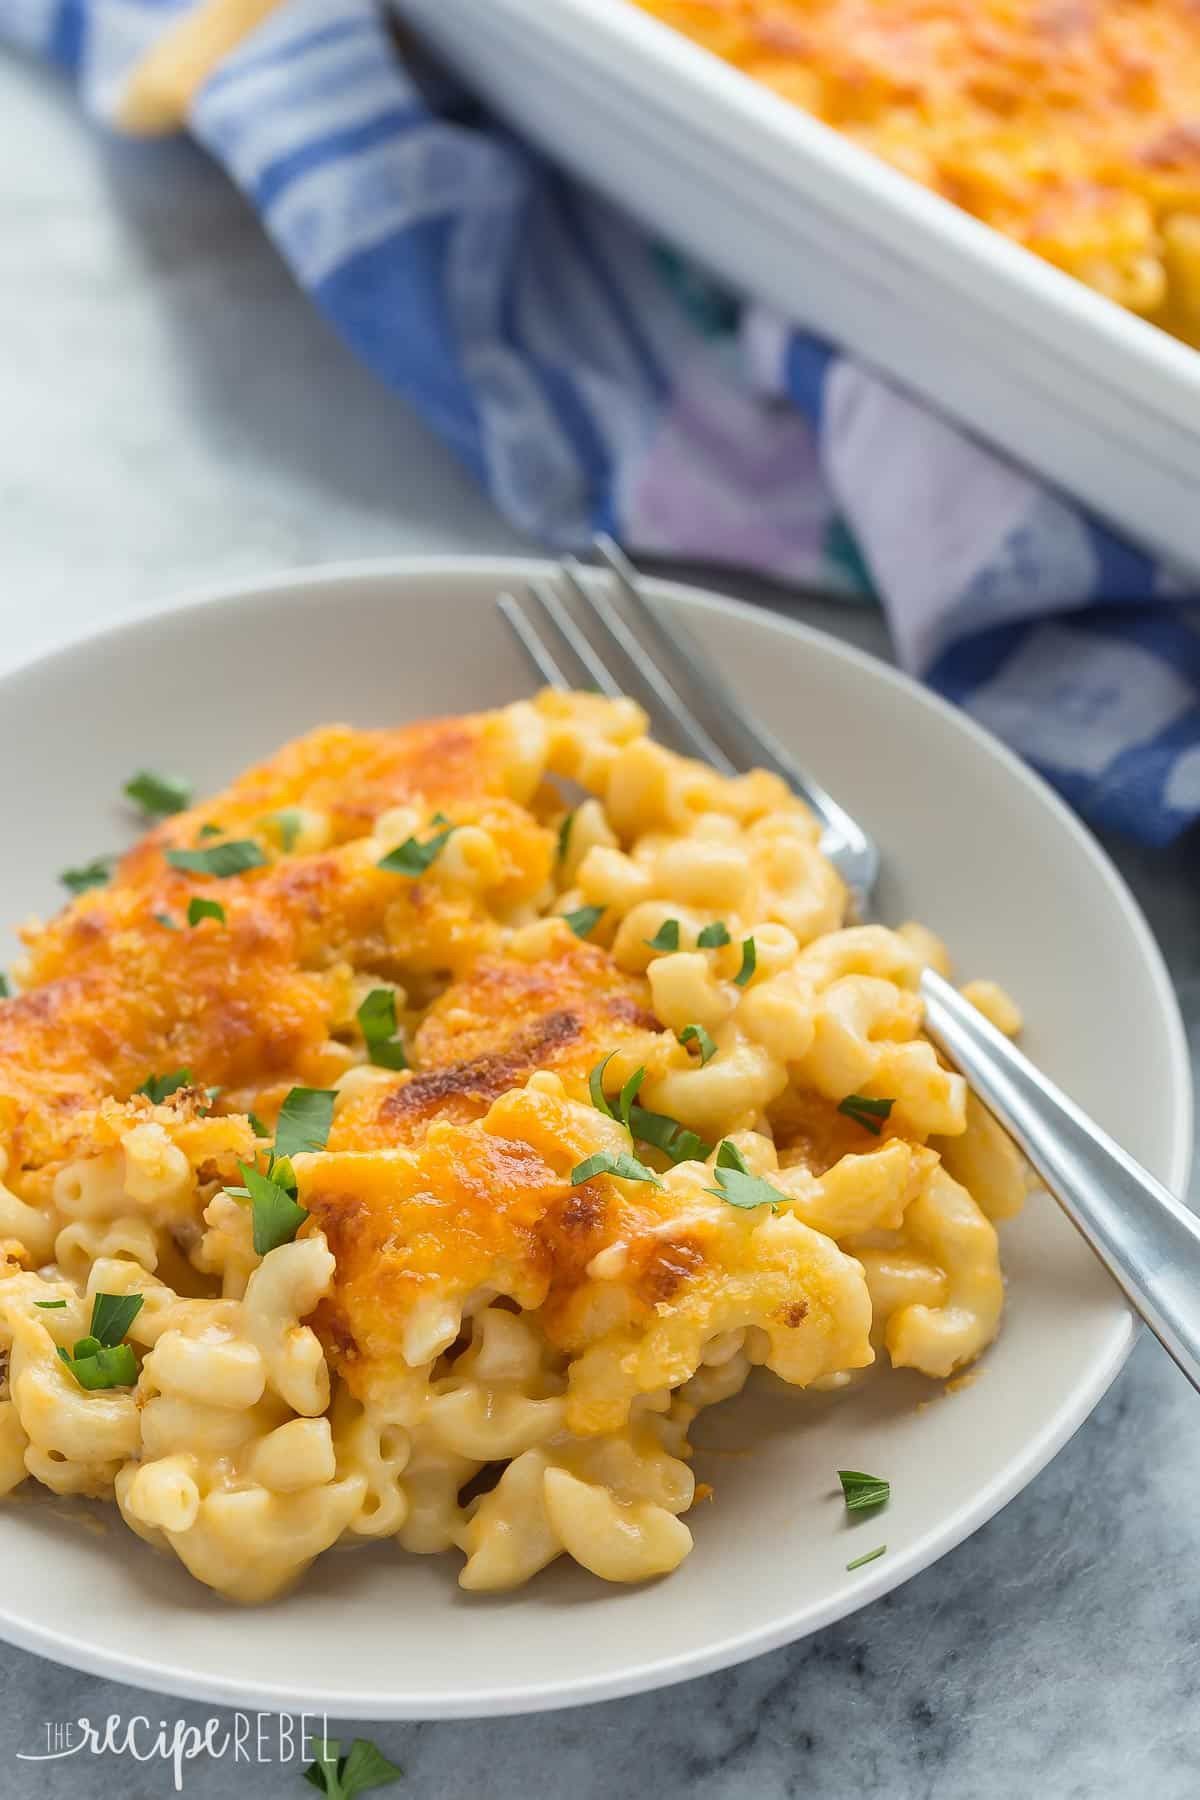 Baked Macaroni And Cheese Healthy
 Healthier Baked Mac and Cheese